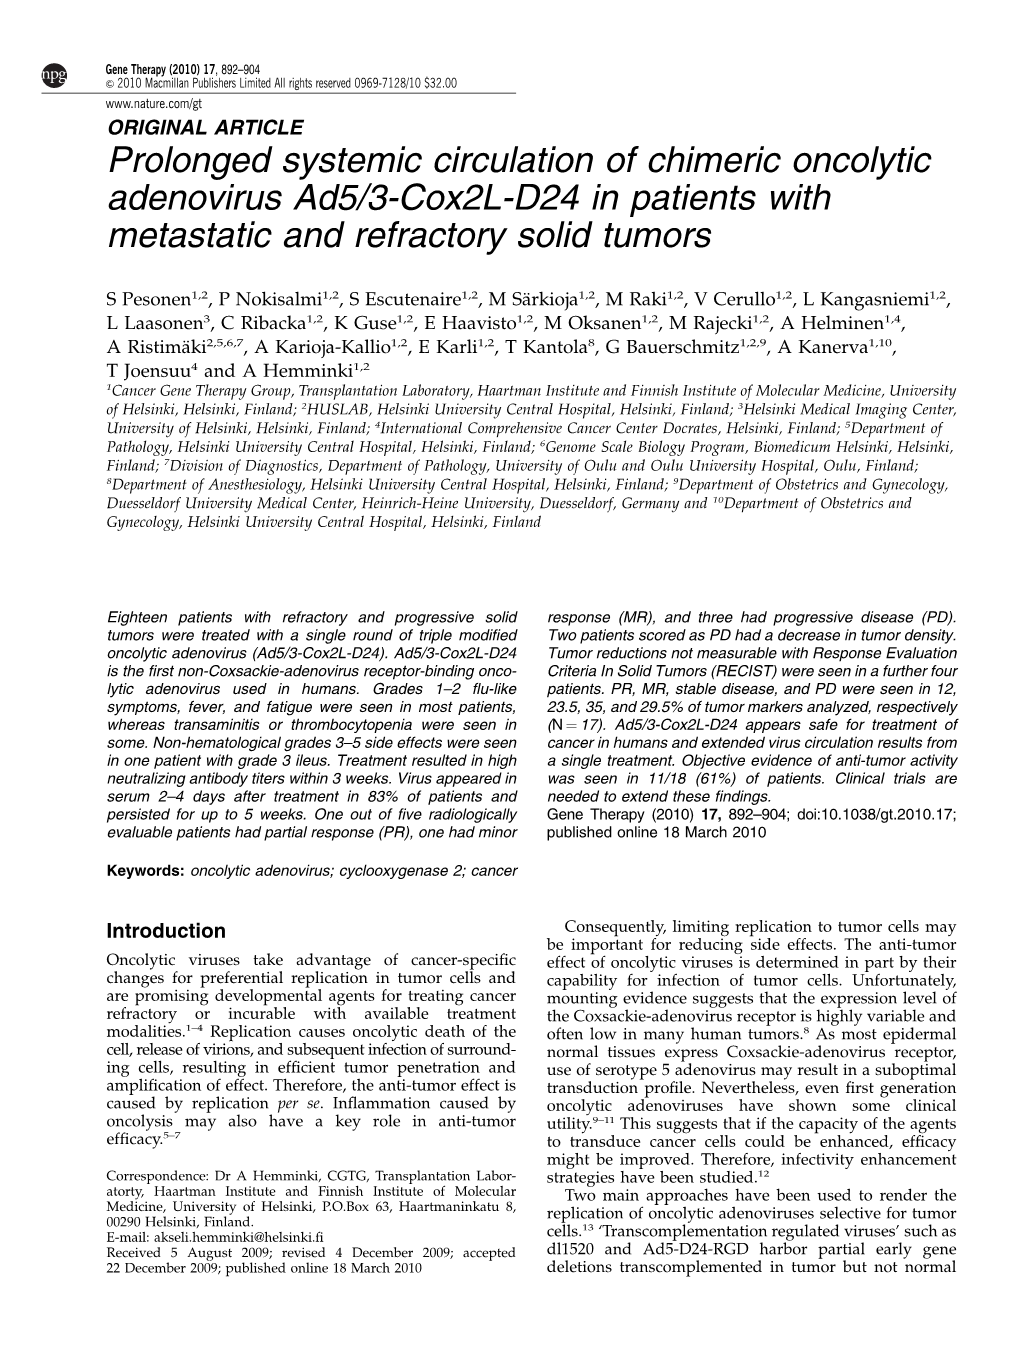 Prolonged Systemic Circulation of Chimeric Oncolytic Adenovirus Ad5/3-Cox2l-D24 in Patients with Metastatic and Refractory Solid Tumors